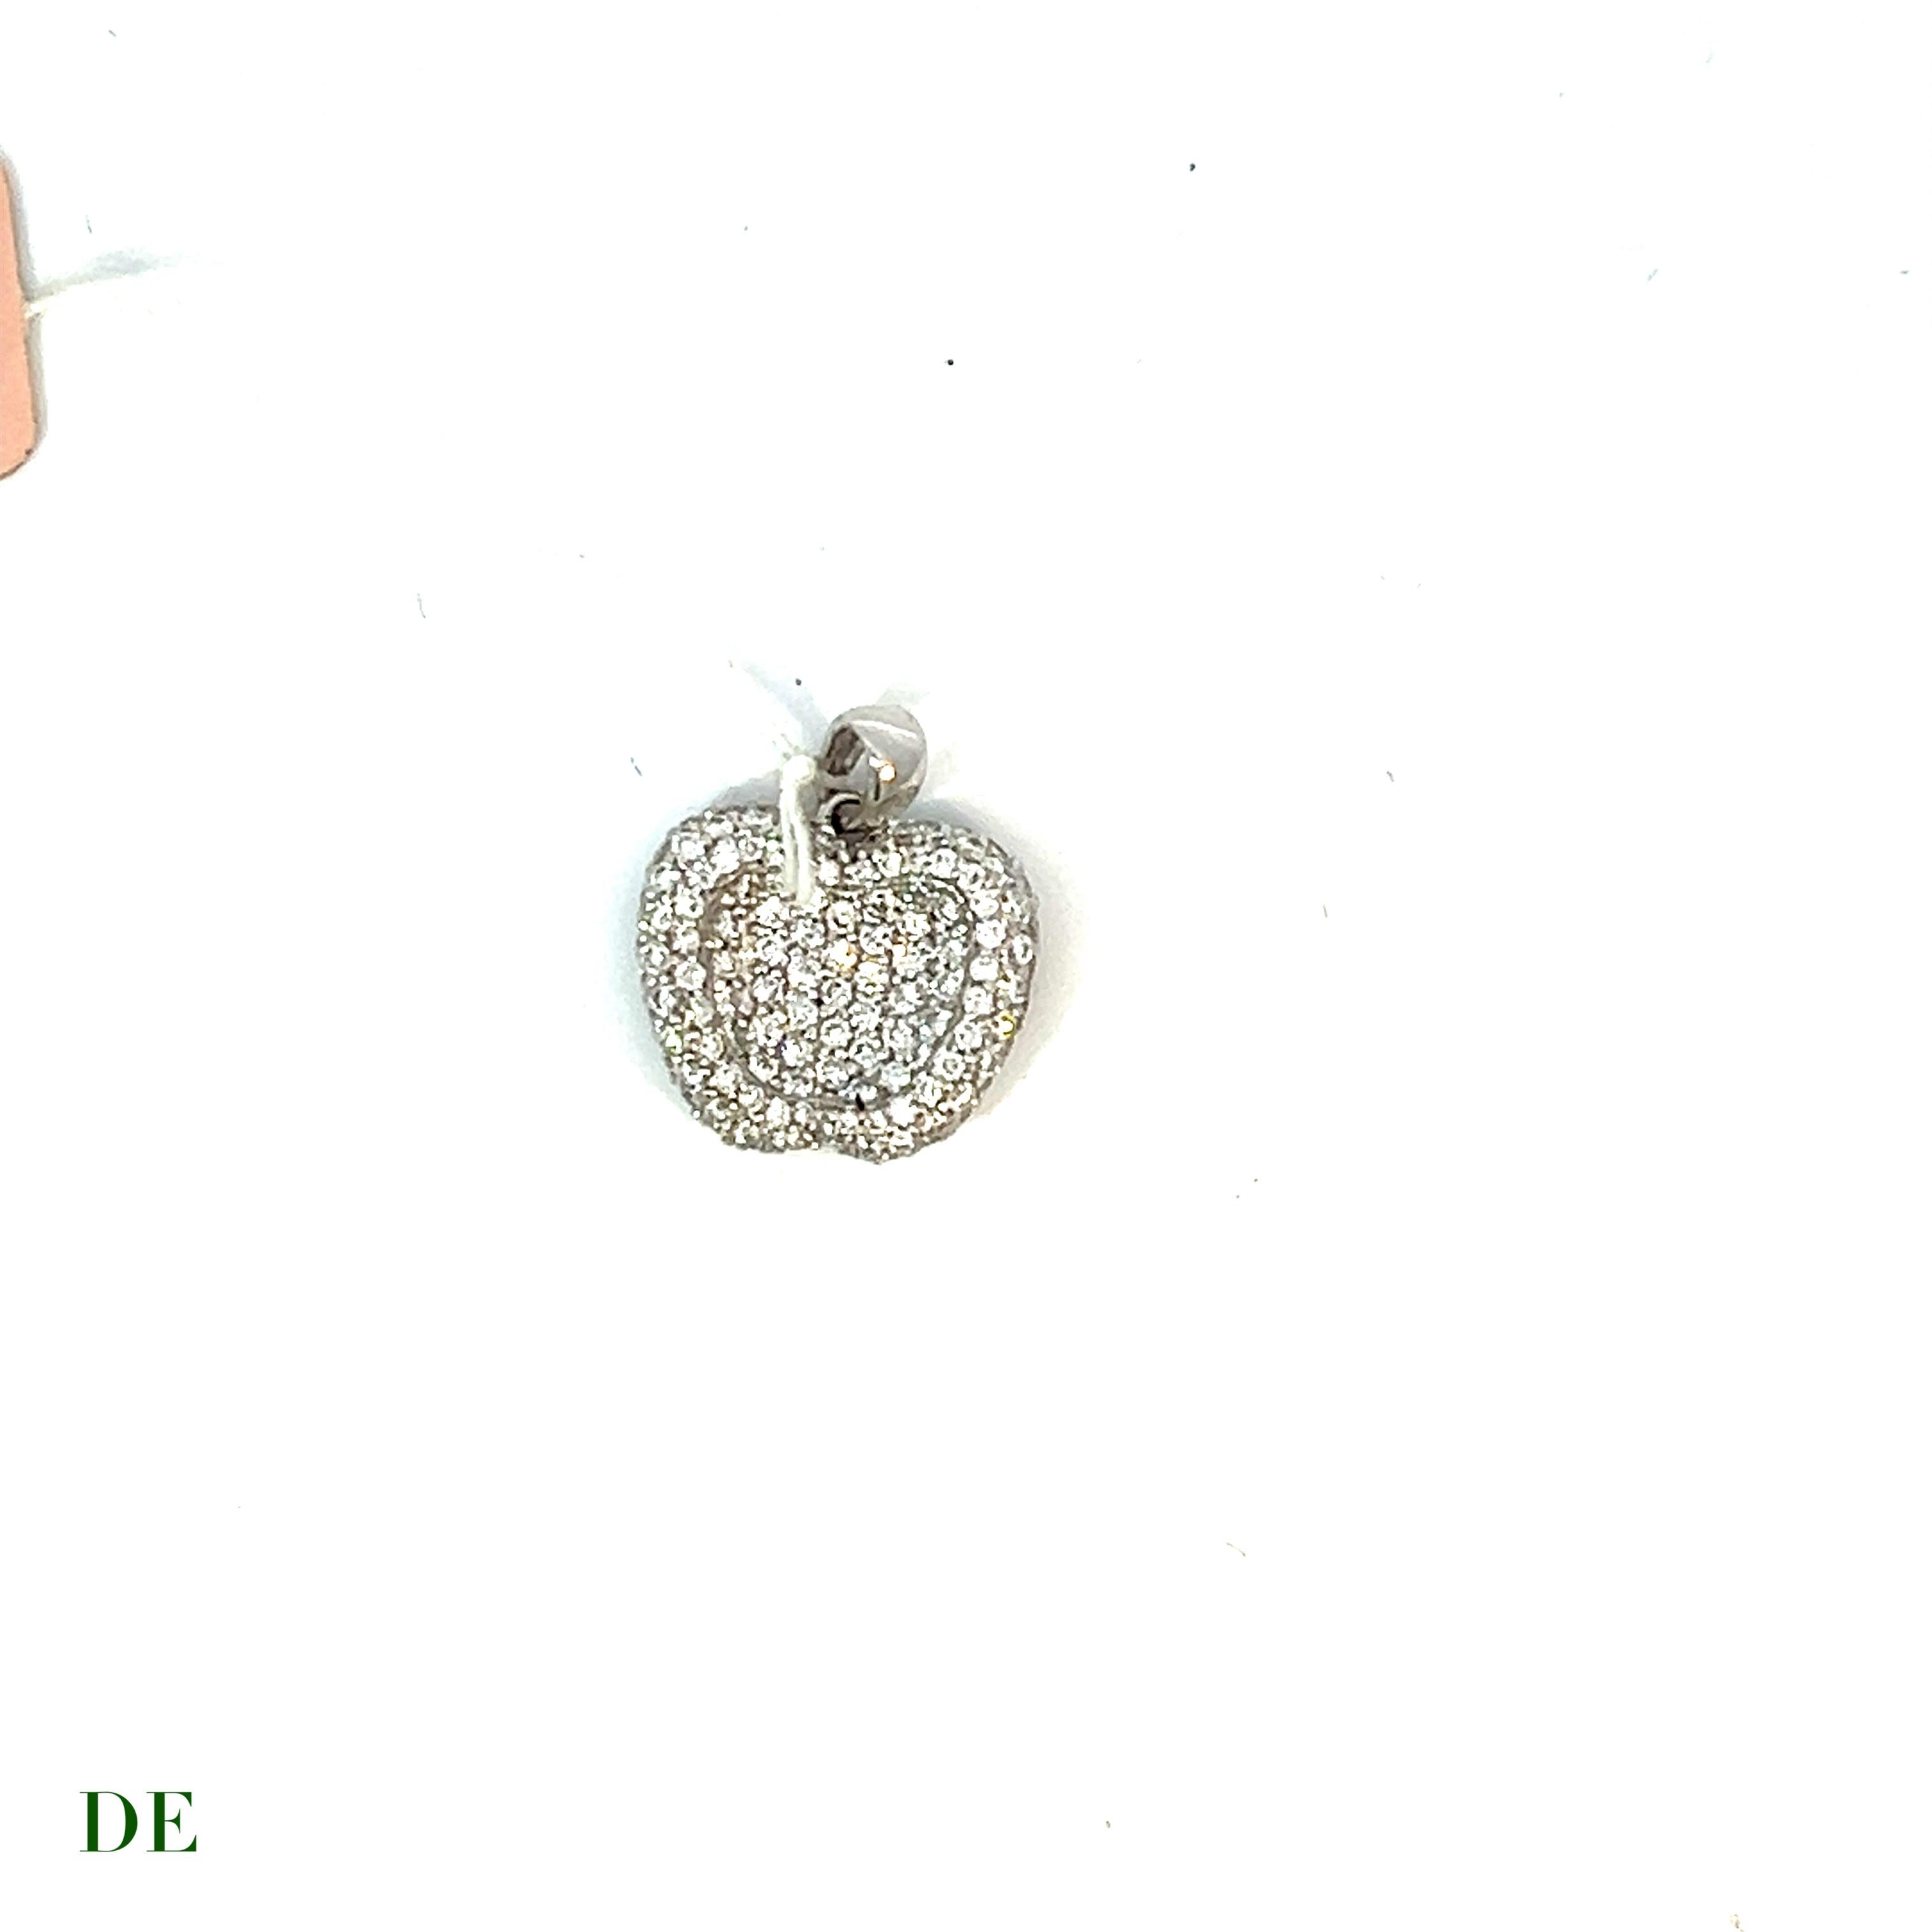 Timeless Beauty Love at First Sight Adam Eve Apple 18k 1.44 ct Diamond Pendant In New Condition For Sale In kowloon, Kowloon